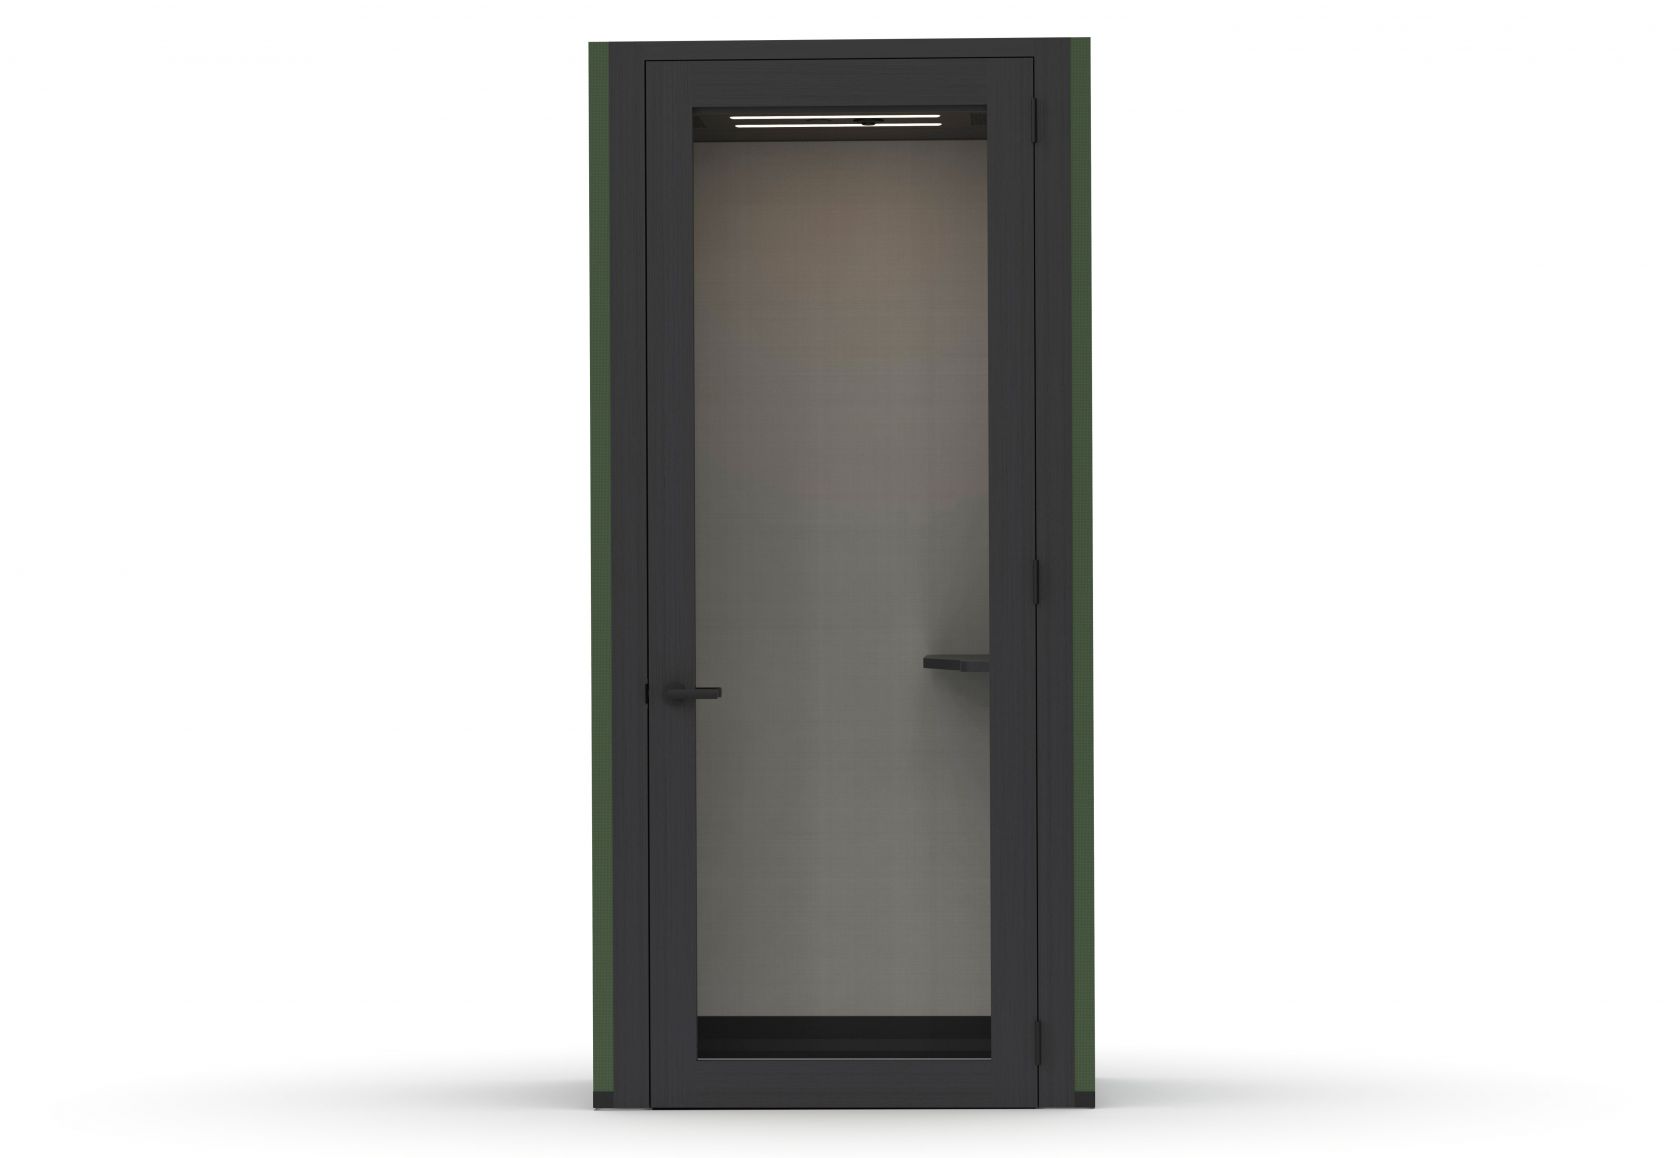 FQR phone booth front specification